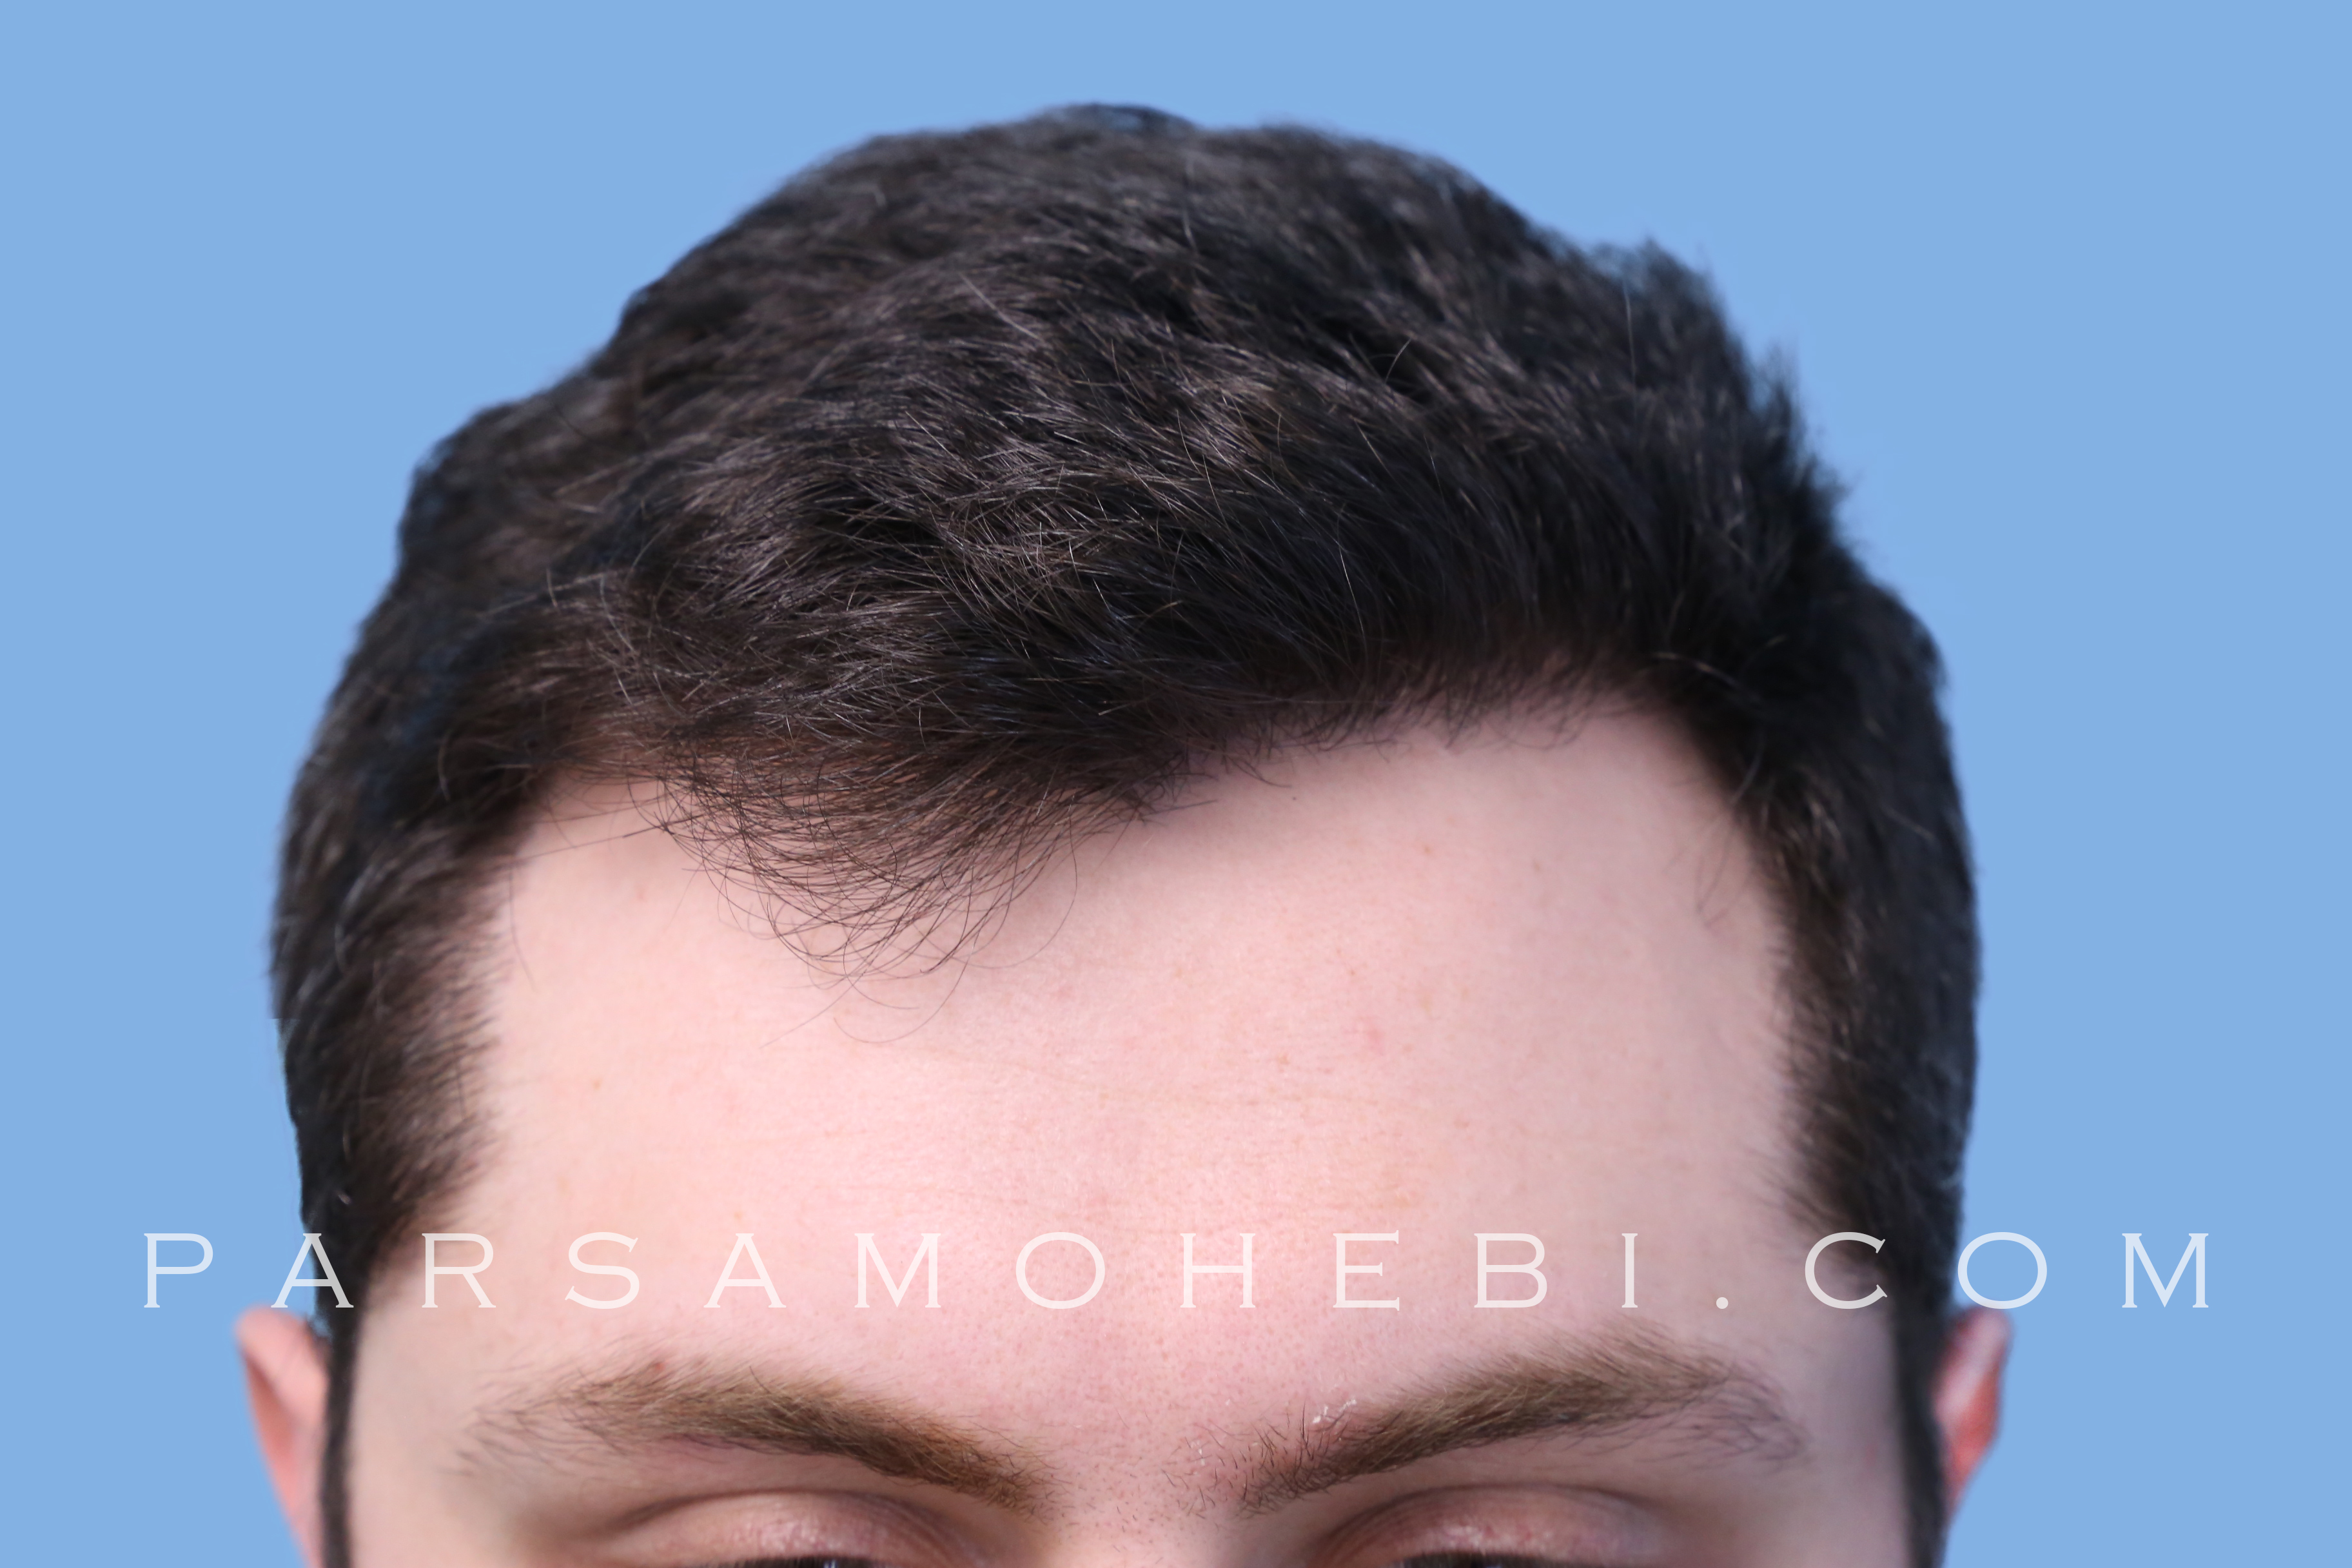 Hair Transplant Recovery Pictures - Hair Transplant Images - Parsa Mohebi  Hair Restoration